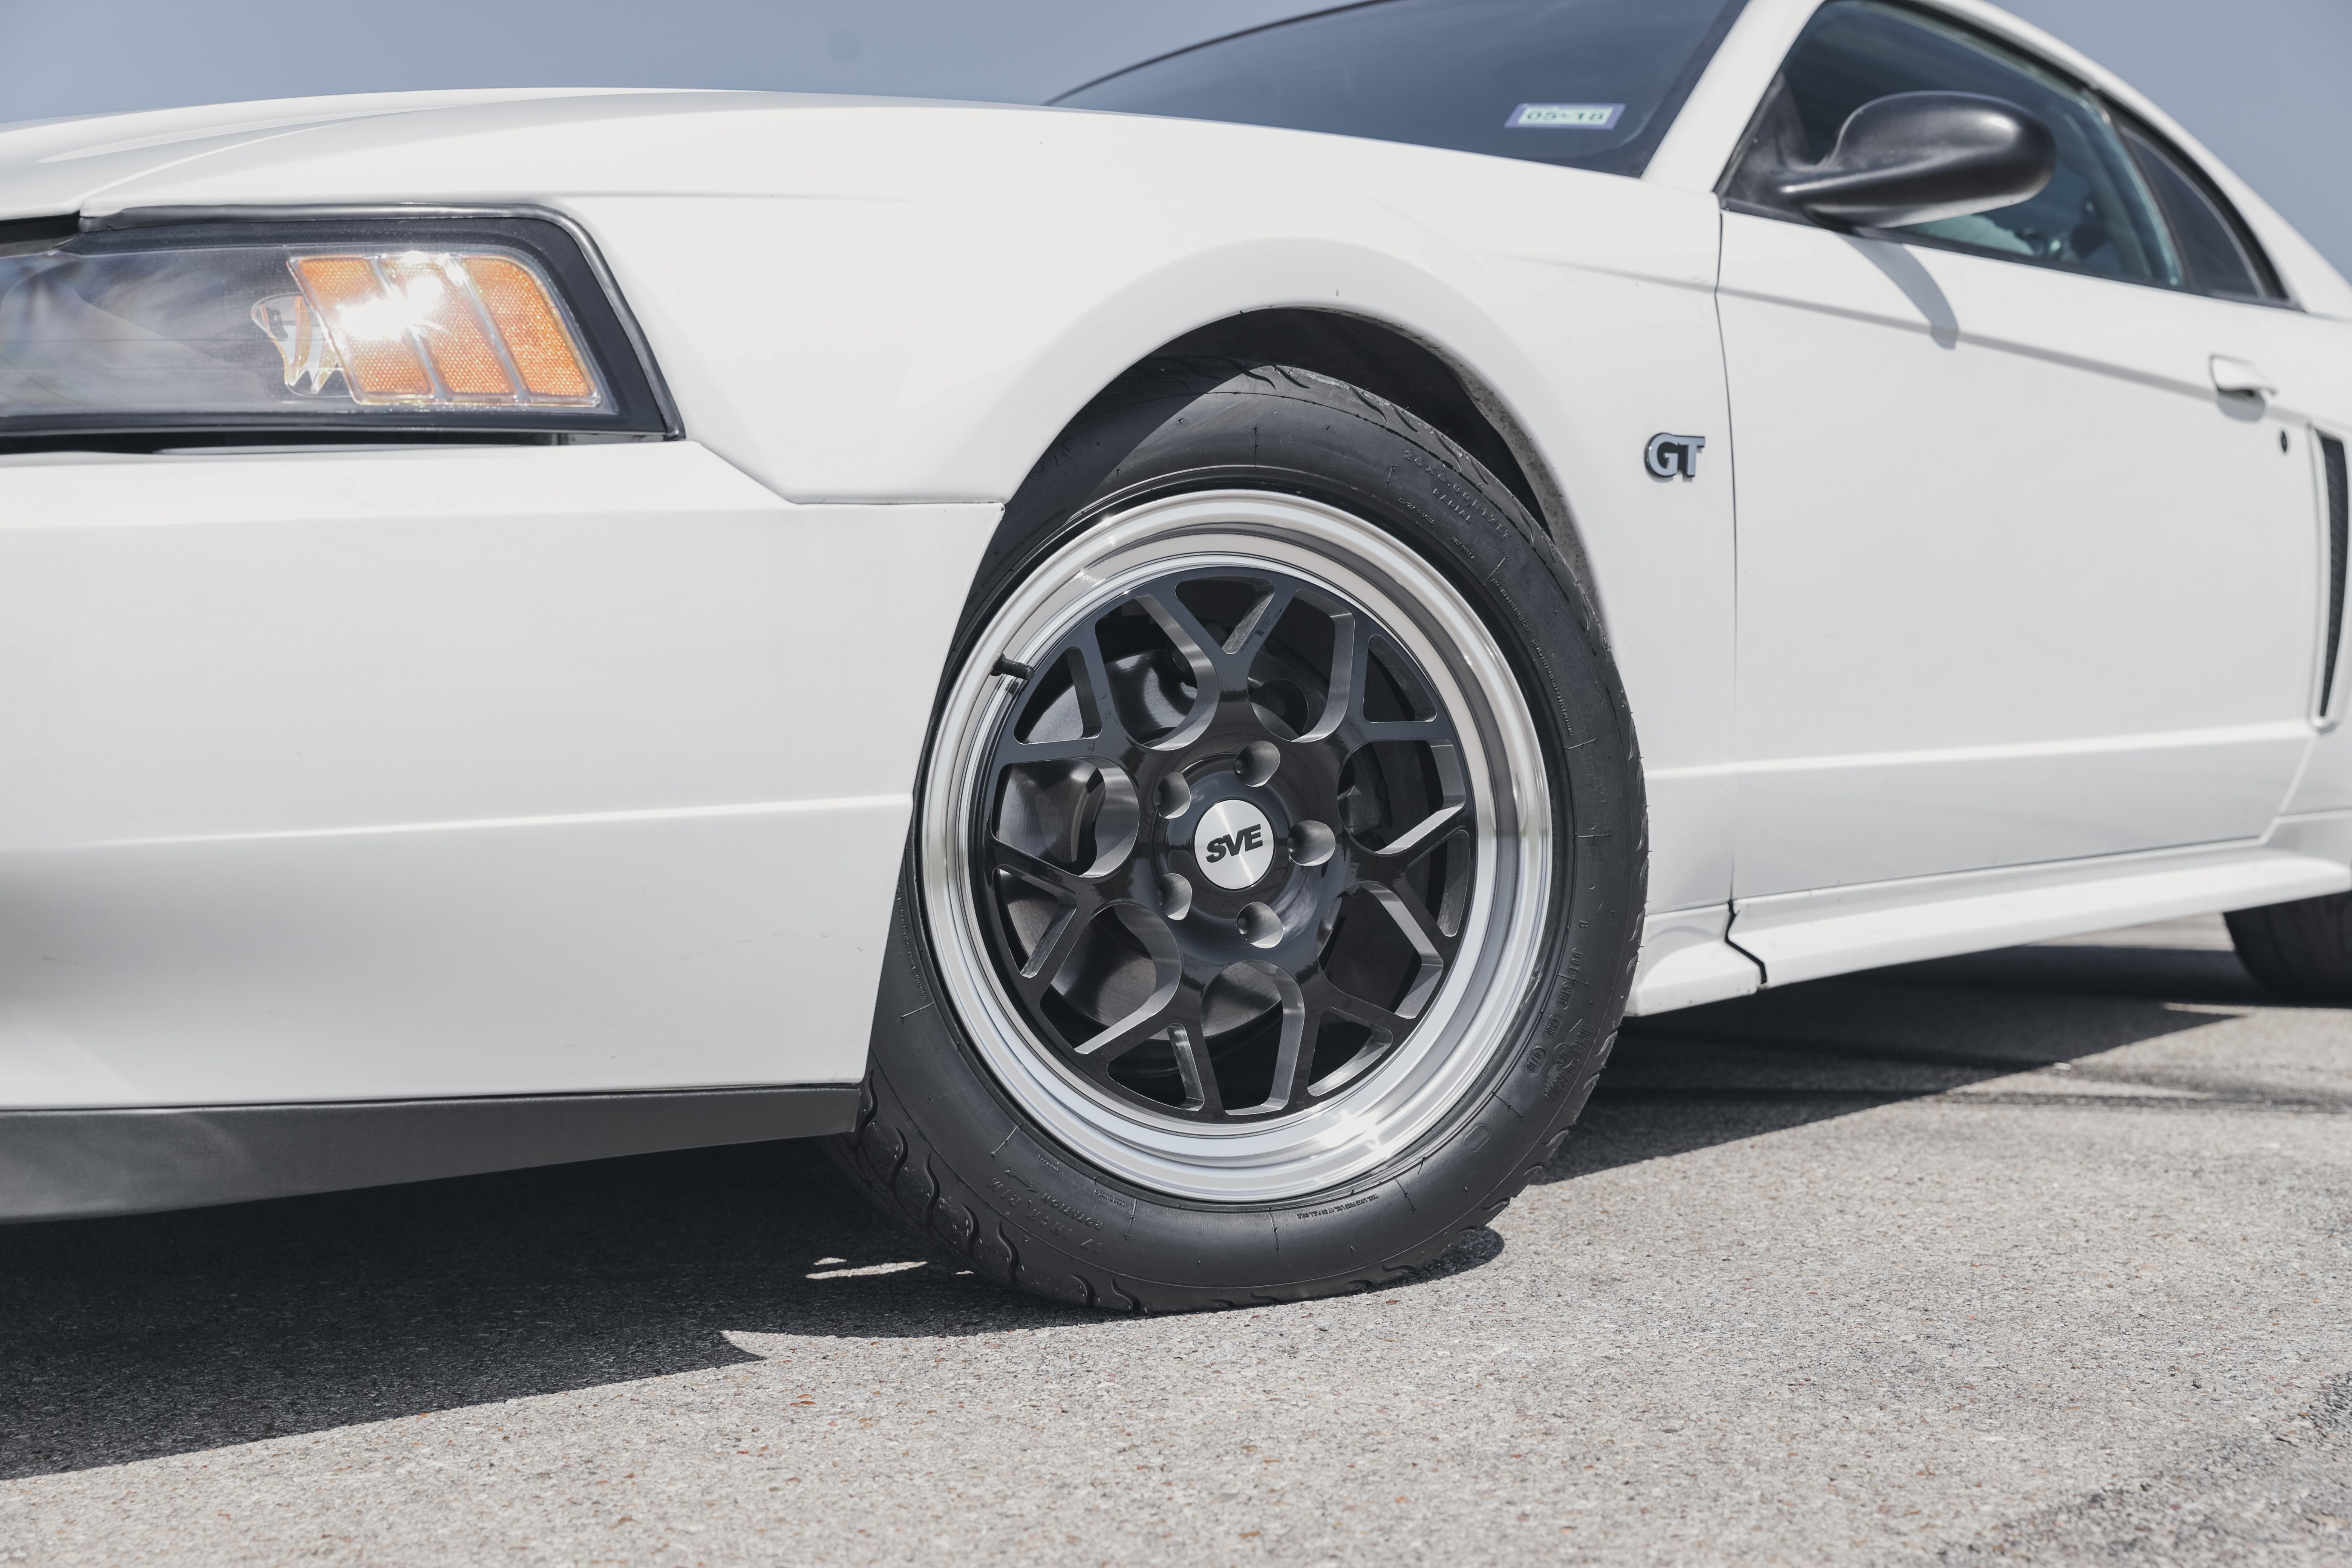 Mustang Drag Comp Wheels | SVE Product Highlight   - Mustang Drag Comp Wheels | SVE Product Highlight  